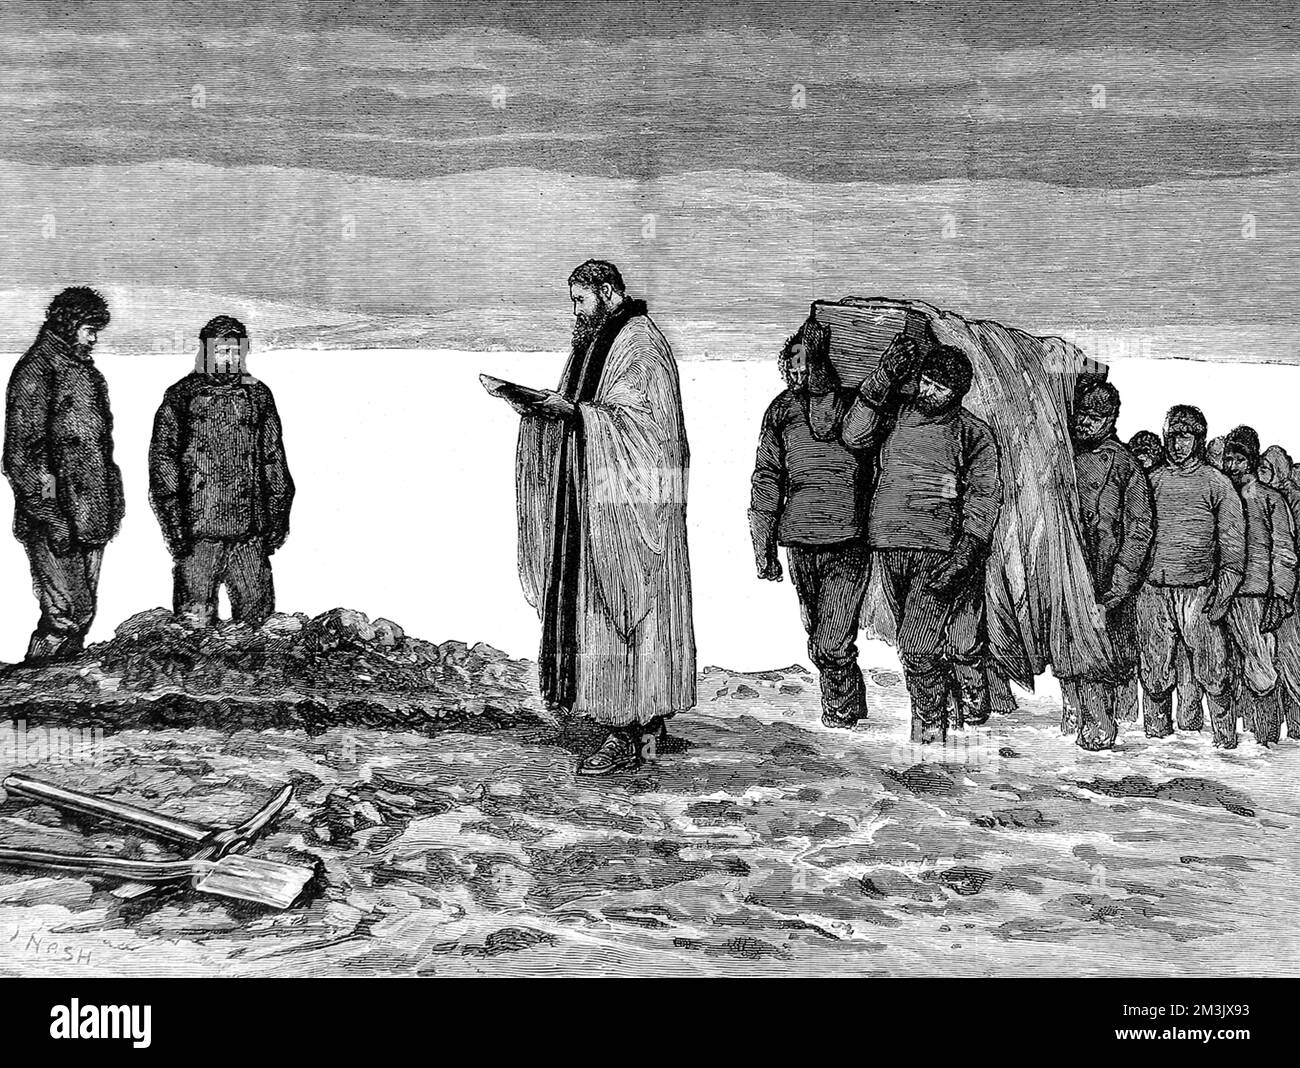 The funeral of Hans Christian Petersen, the Danish interpreter, during the British Arctic Expedition of 1875-1876. Petersen had gone out with a sledging party and suffered severe frostbite, requiring amputation of both feet. He subsequently died from blood-poisoning and was buried close to the winter berth of HMS 'Alert'.  In the summer of 1875 the British Admiralty sent Captain George Nares with two ships, HMS 'Alert' and HMS 'Discovery', to make an attempt to reach the North Pole via Smith Sound.   Although the attempt was unsuccessful, a new 'furthest North' record was set, the coas Stock Photo